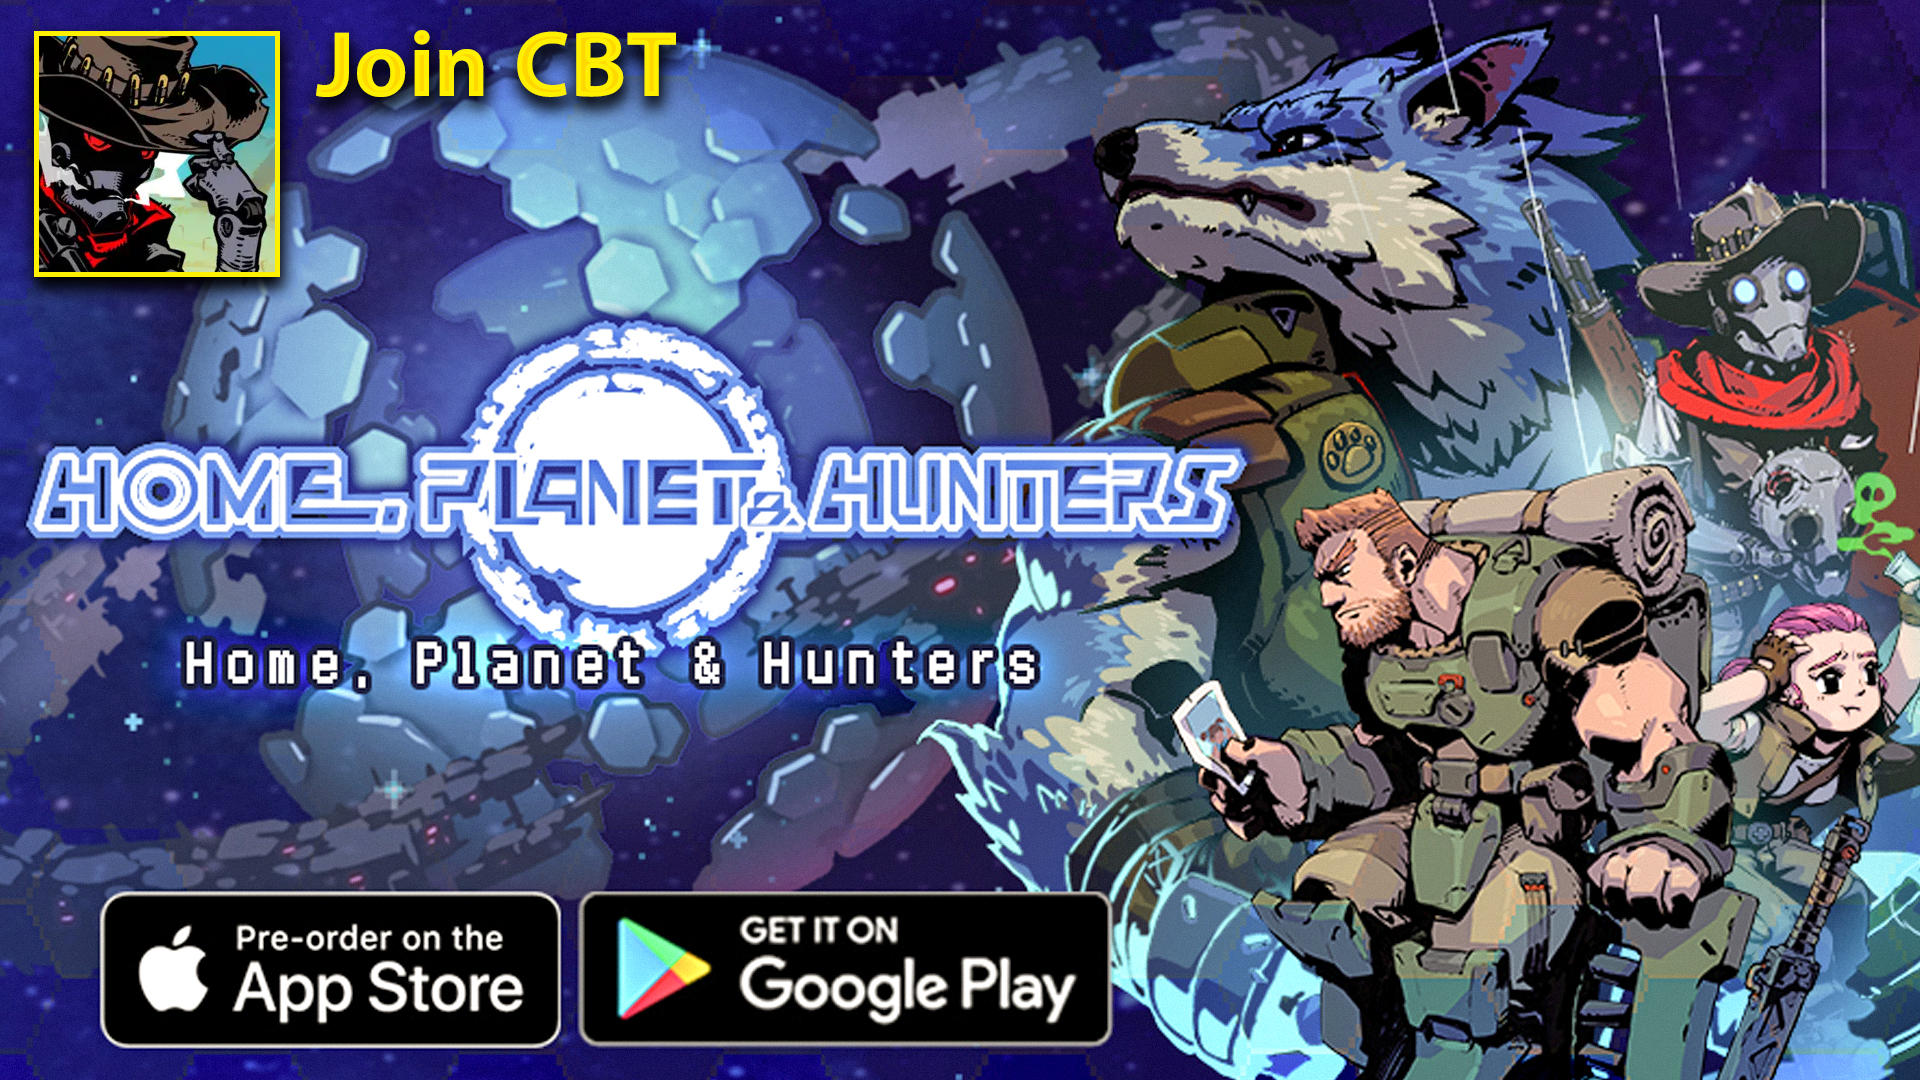 Home, Planet & Hunters // CBT, Pixel-style Wasteland RPG Gameplay (Android & iOS)